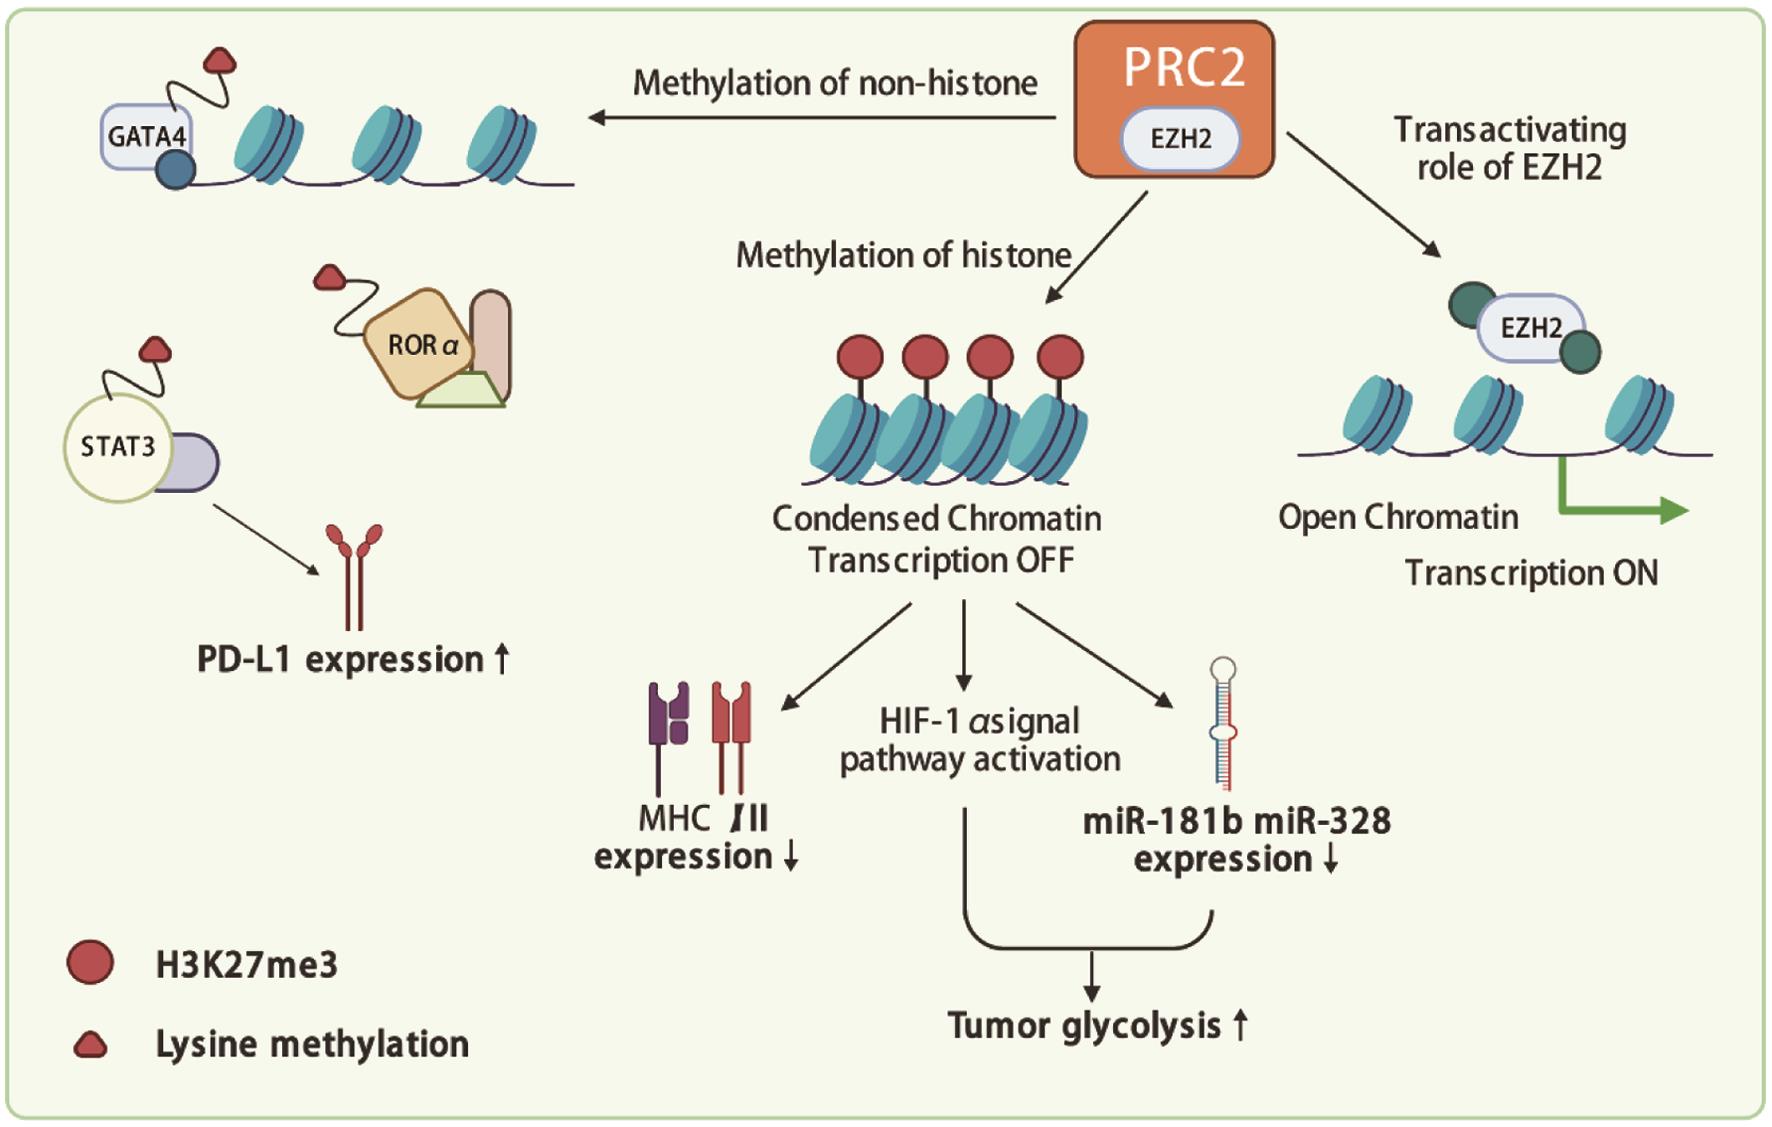 Action mode of EZH2 and its effect on tumor cells.